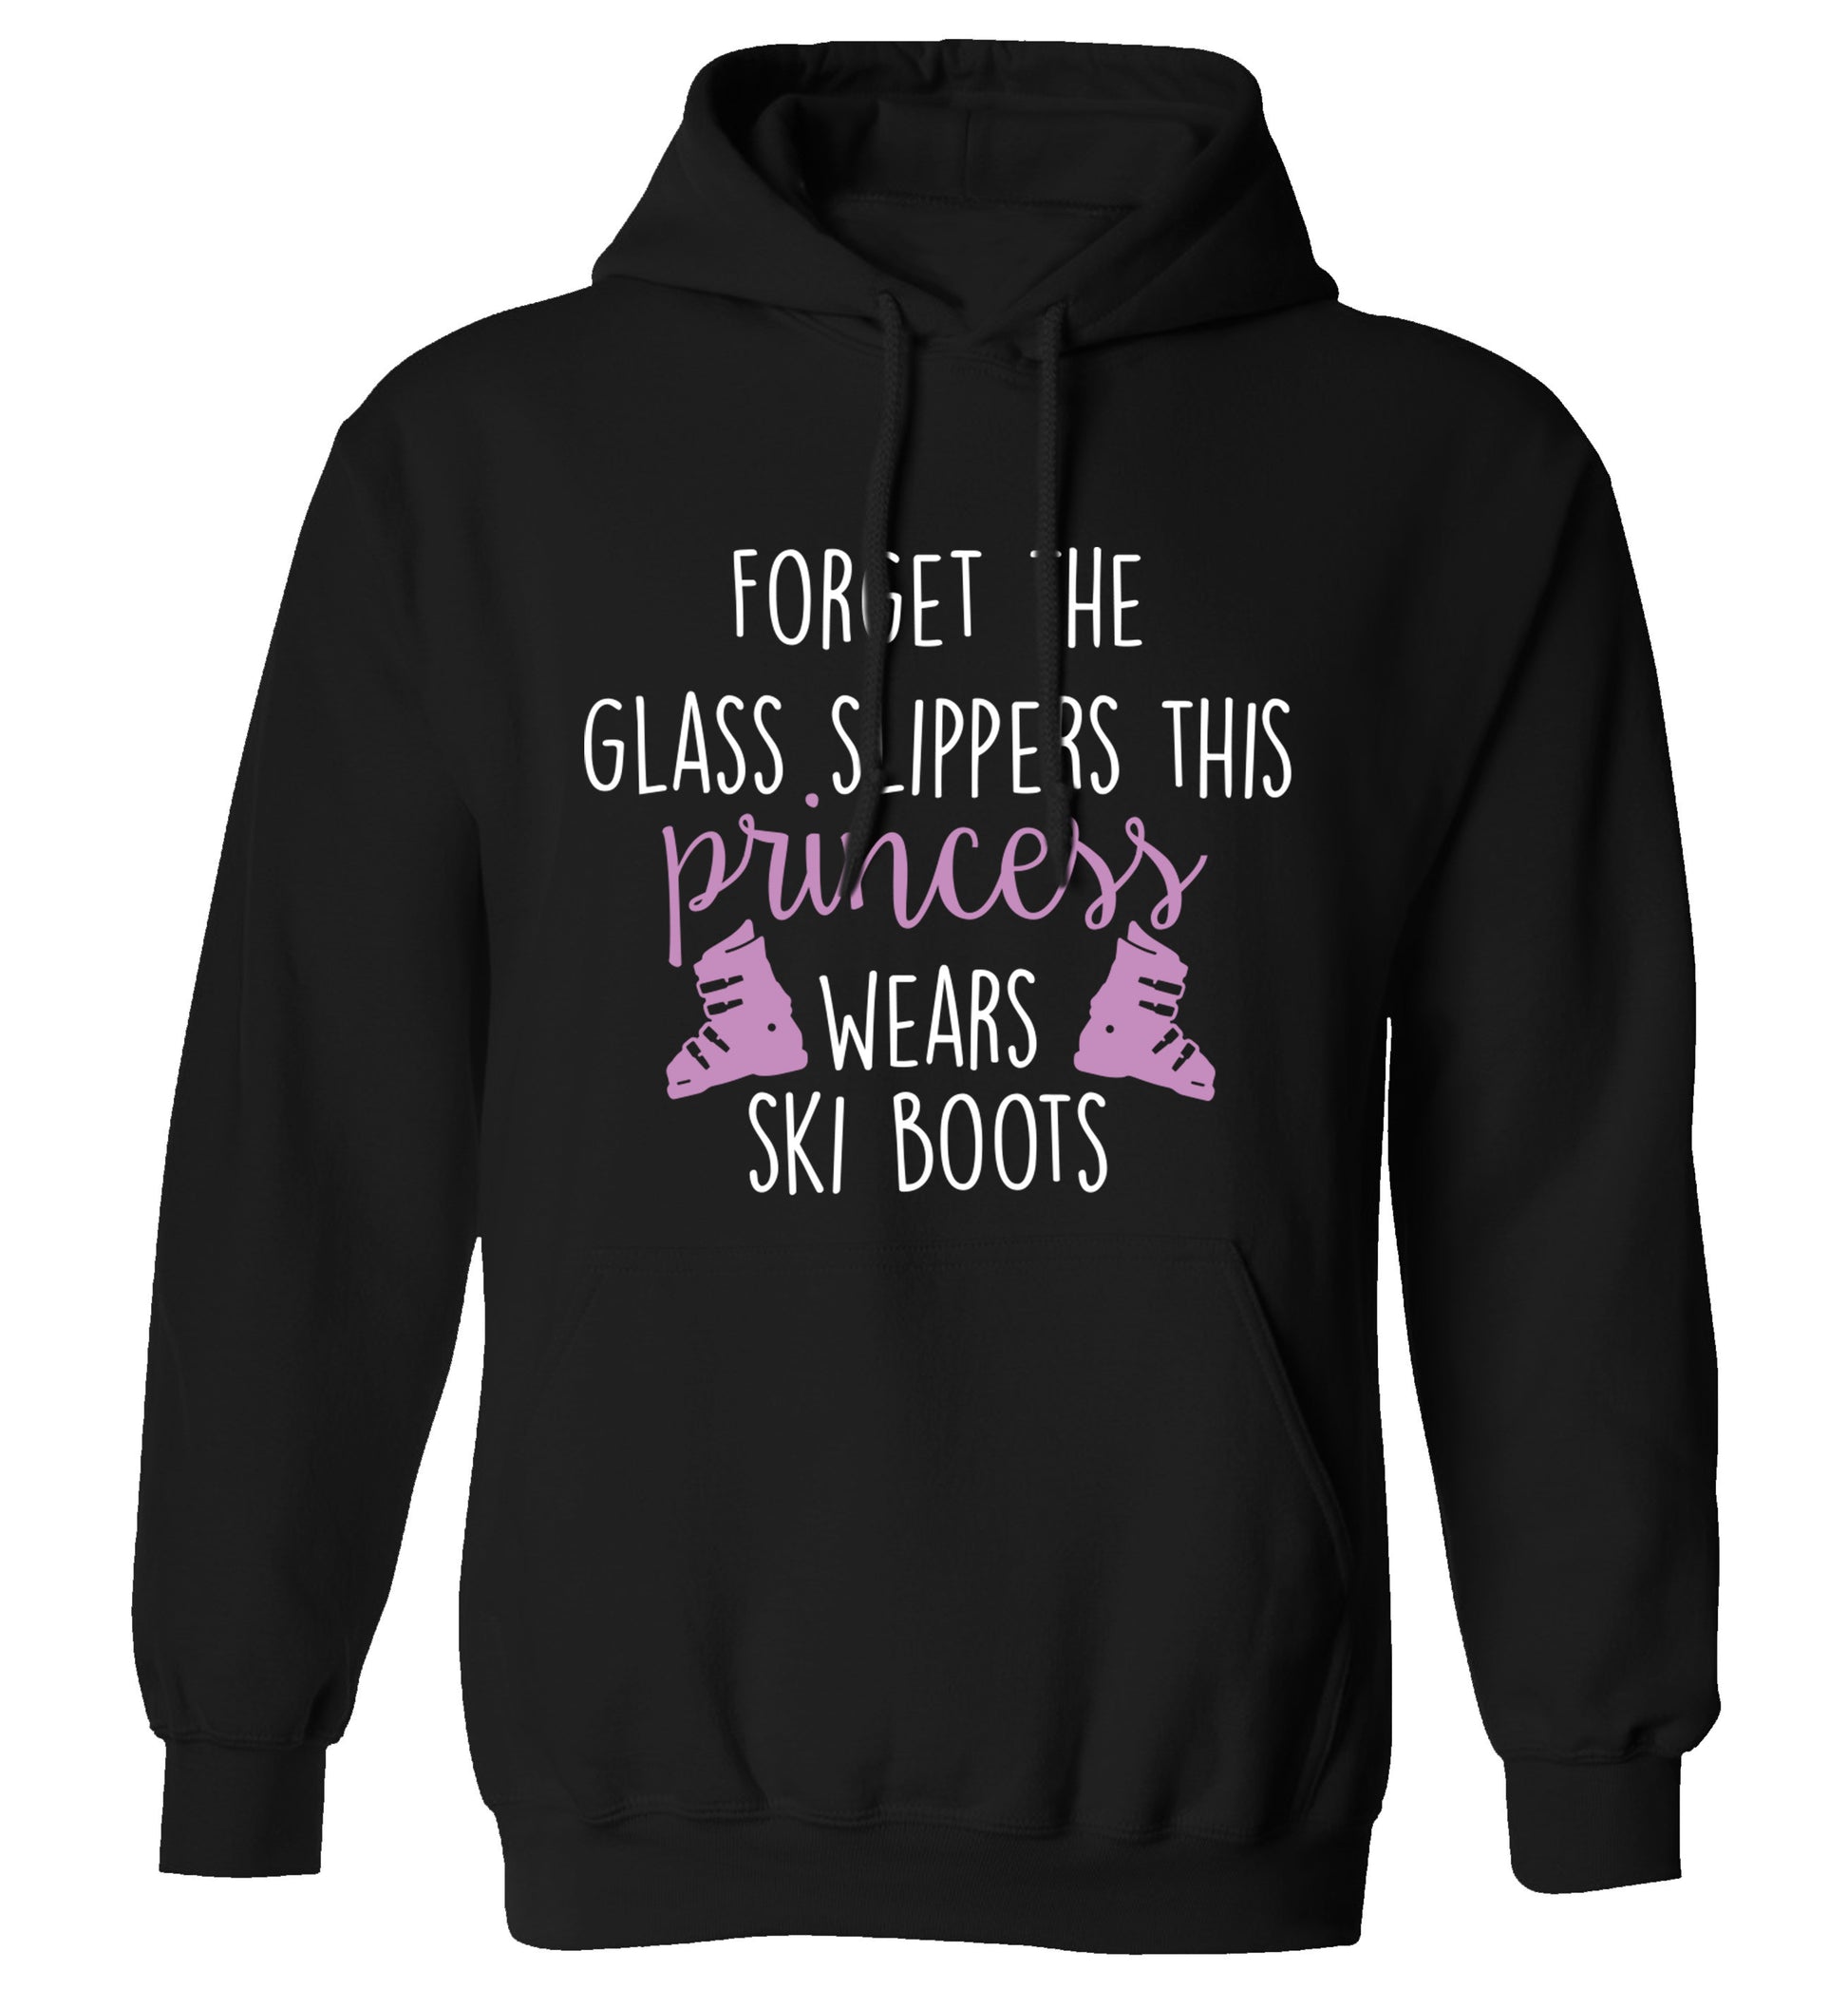 Forget the glass slippers this princess wears ski boots adults unisex black hoodie 2XL